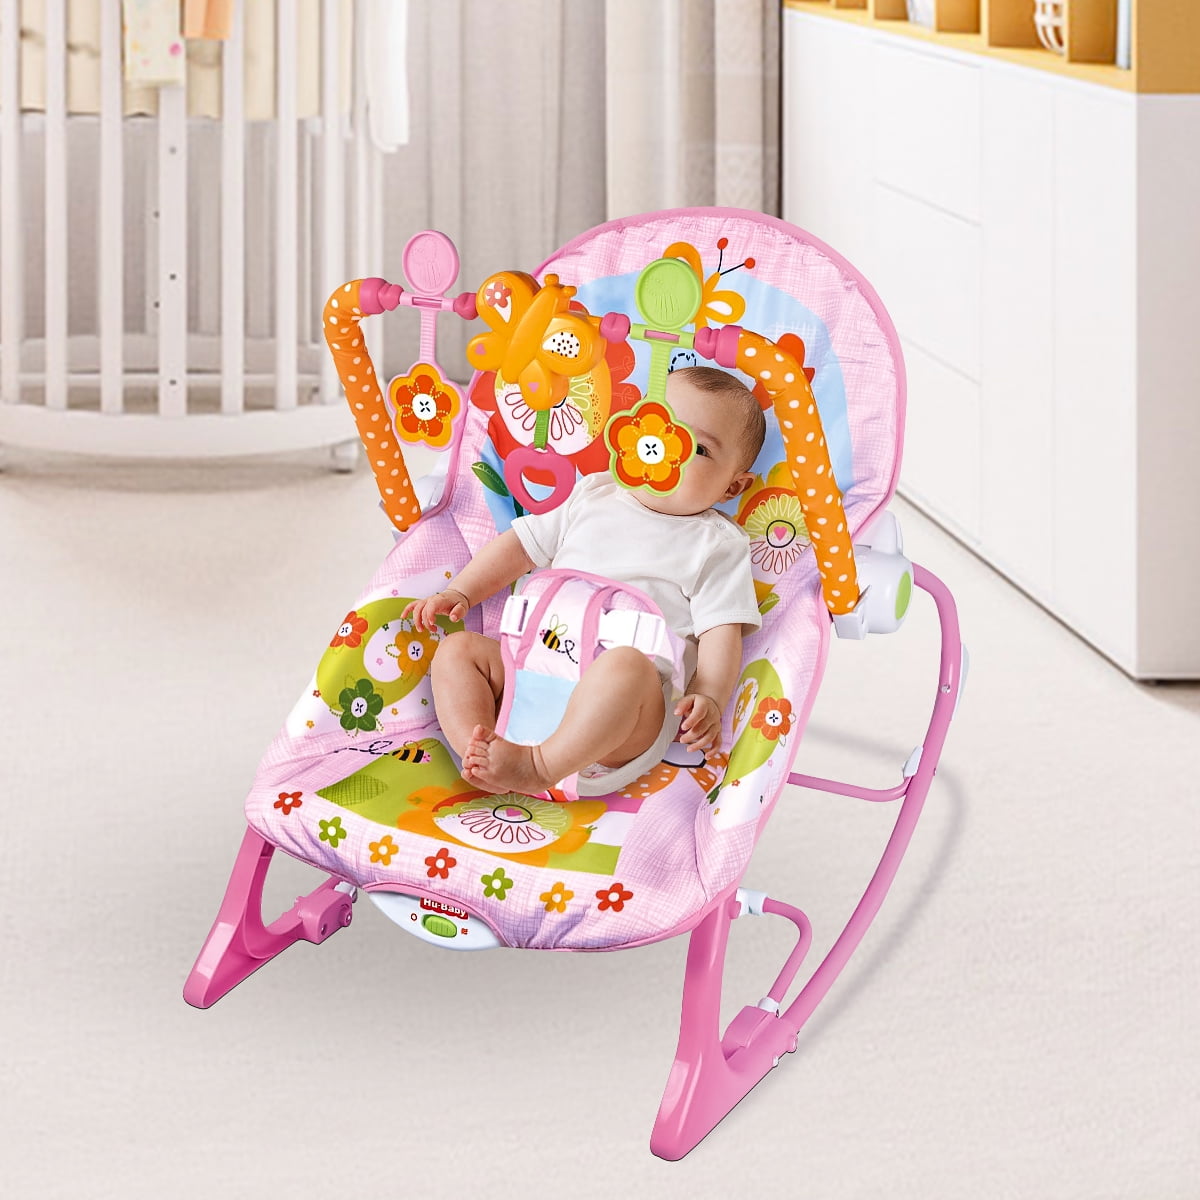 baby bouncer seat age